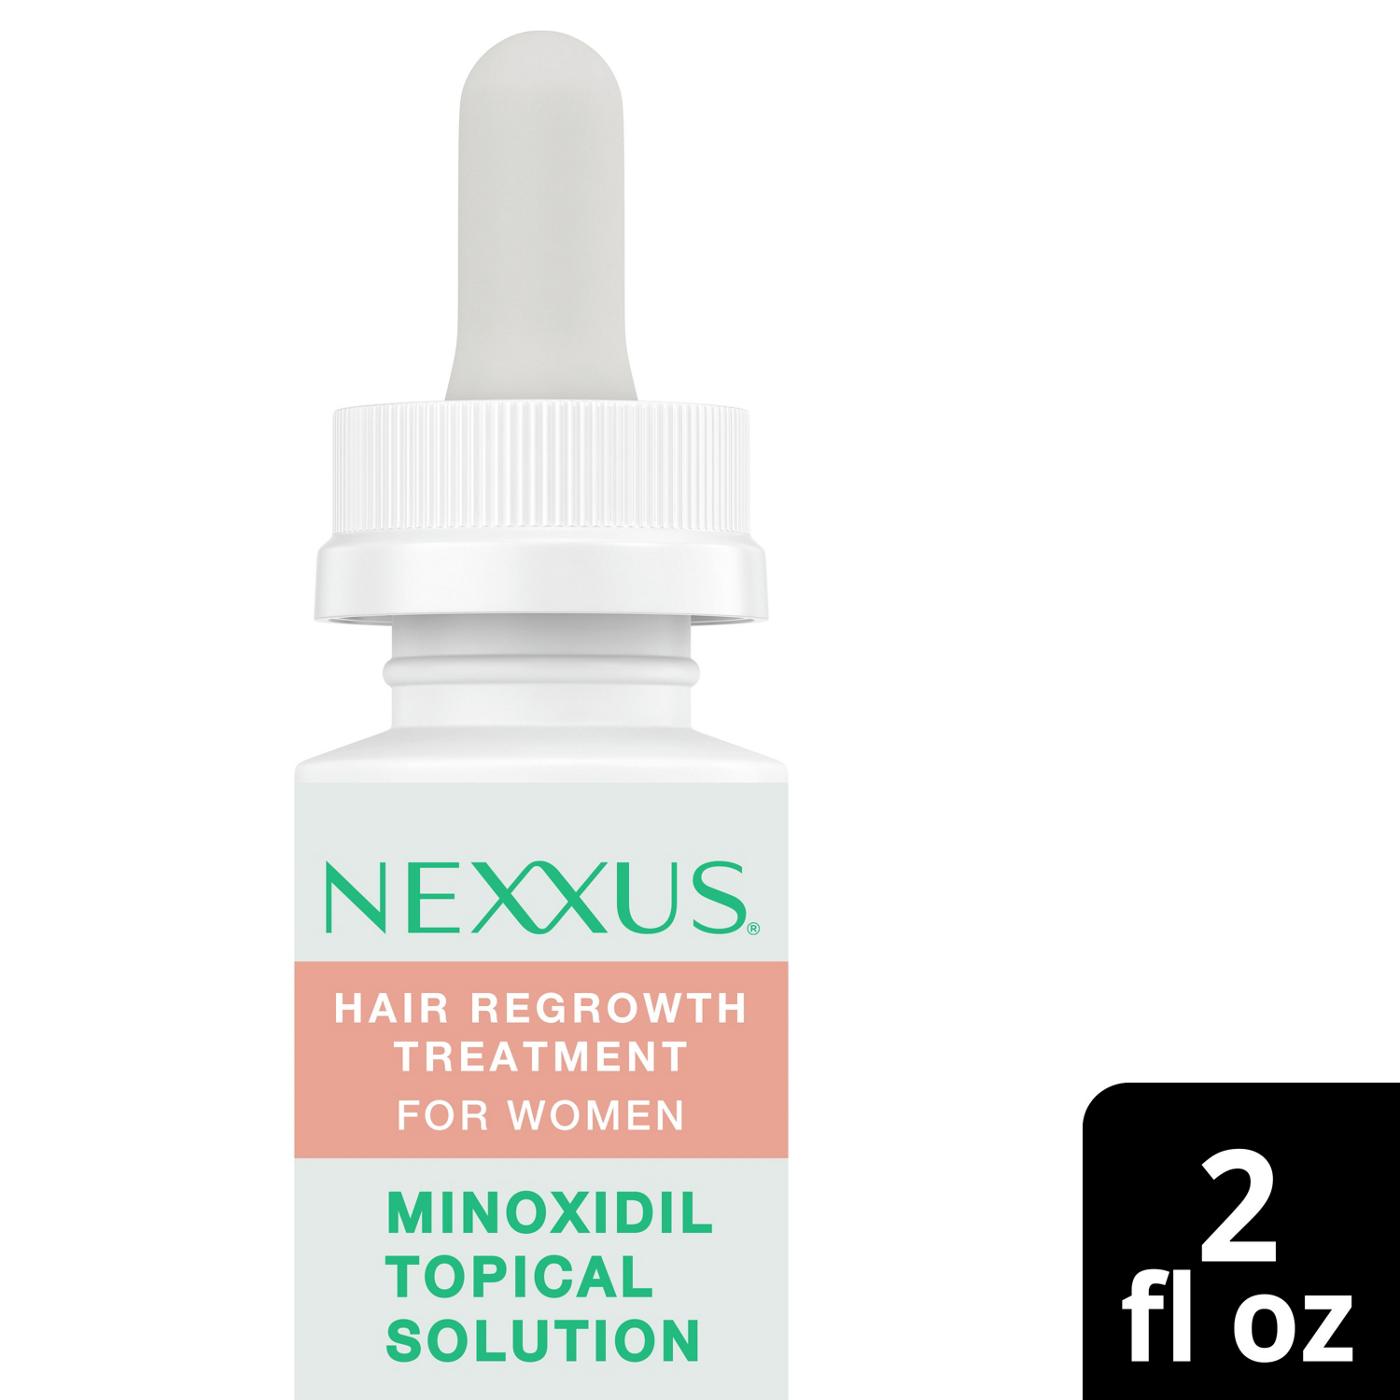 Nexxus Hair Regrowth Treatment for Women; image 2 of 4